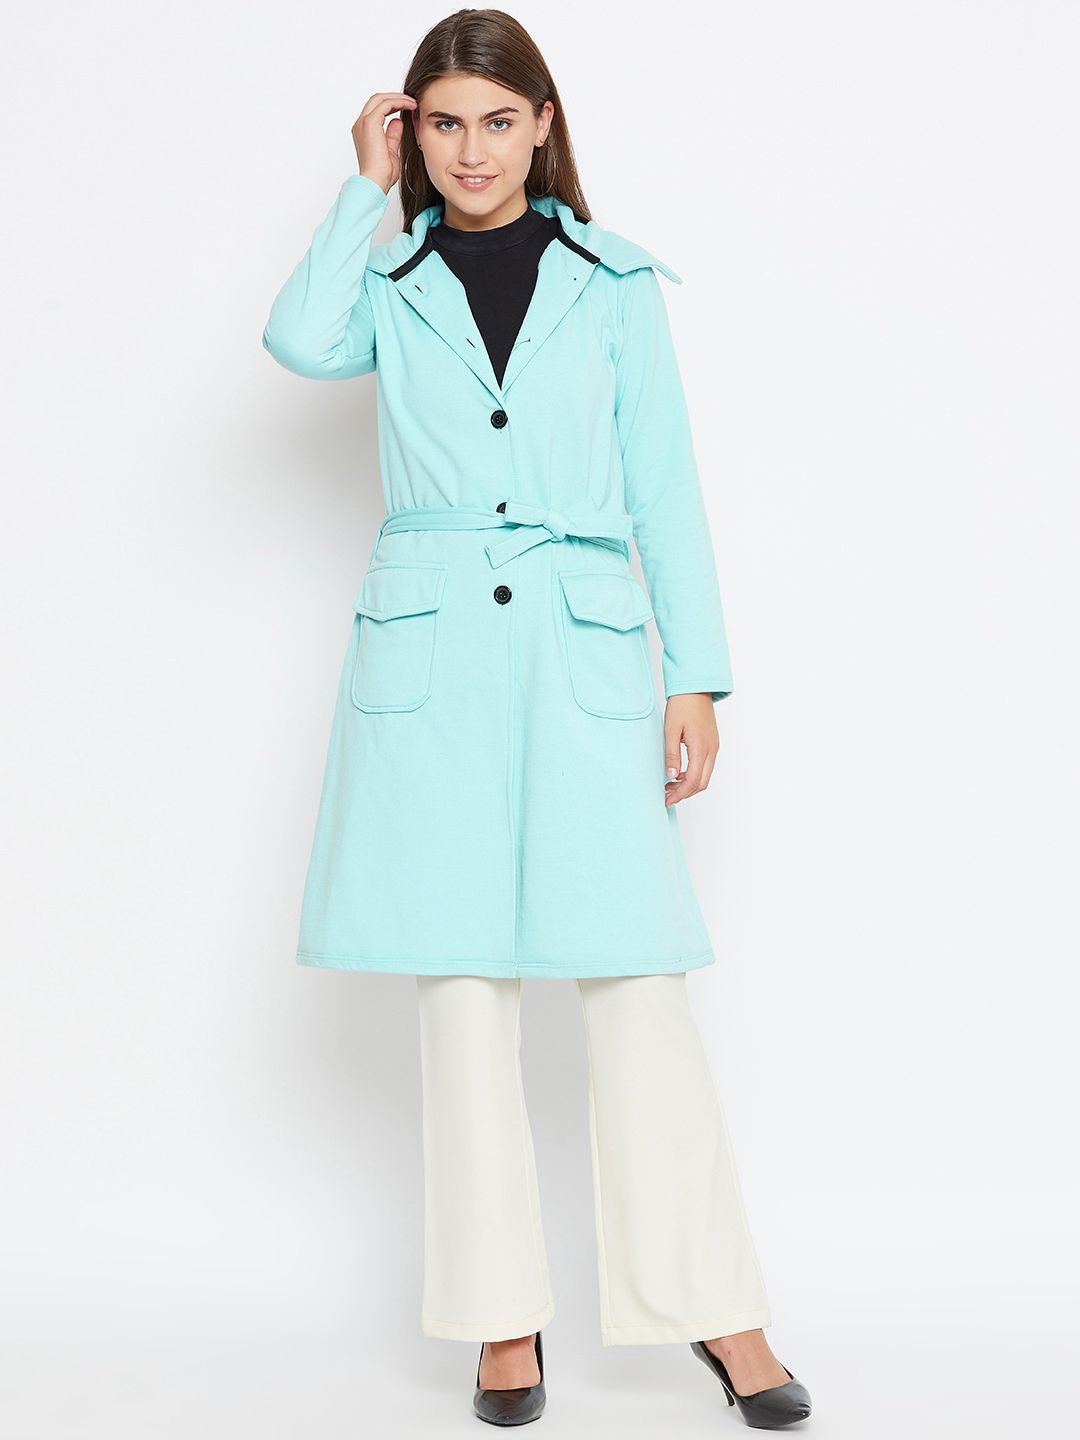 Belle Fille Women Blue Solid Longline Tailored Jacket Price in India